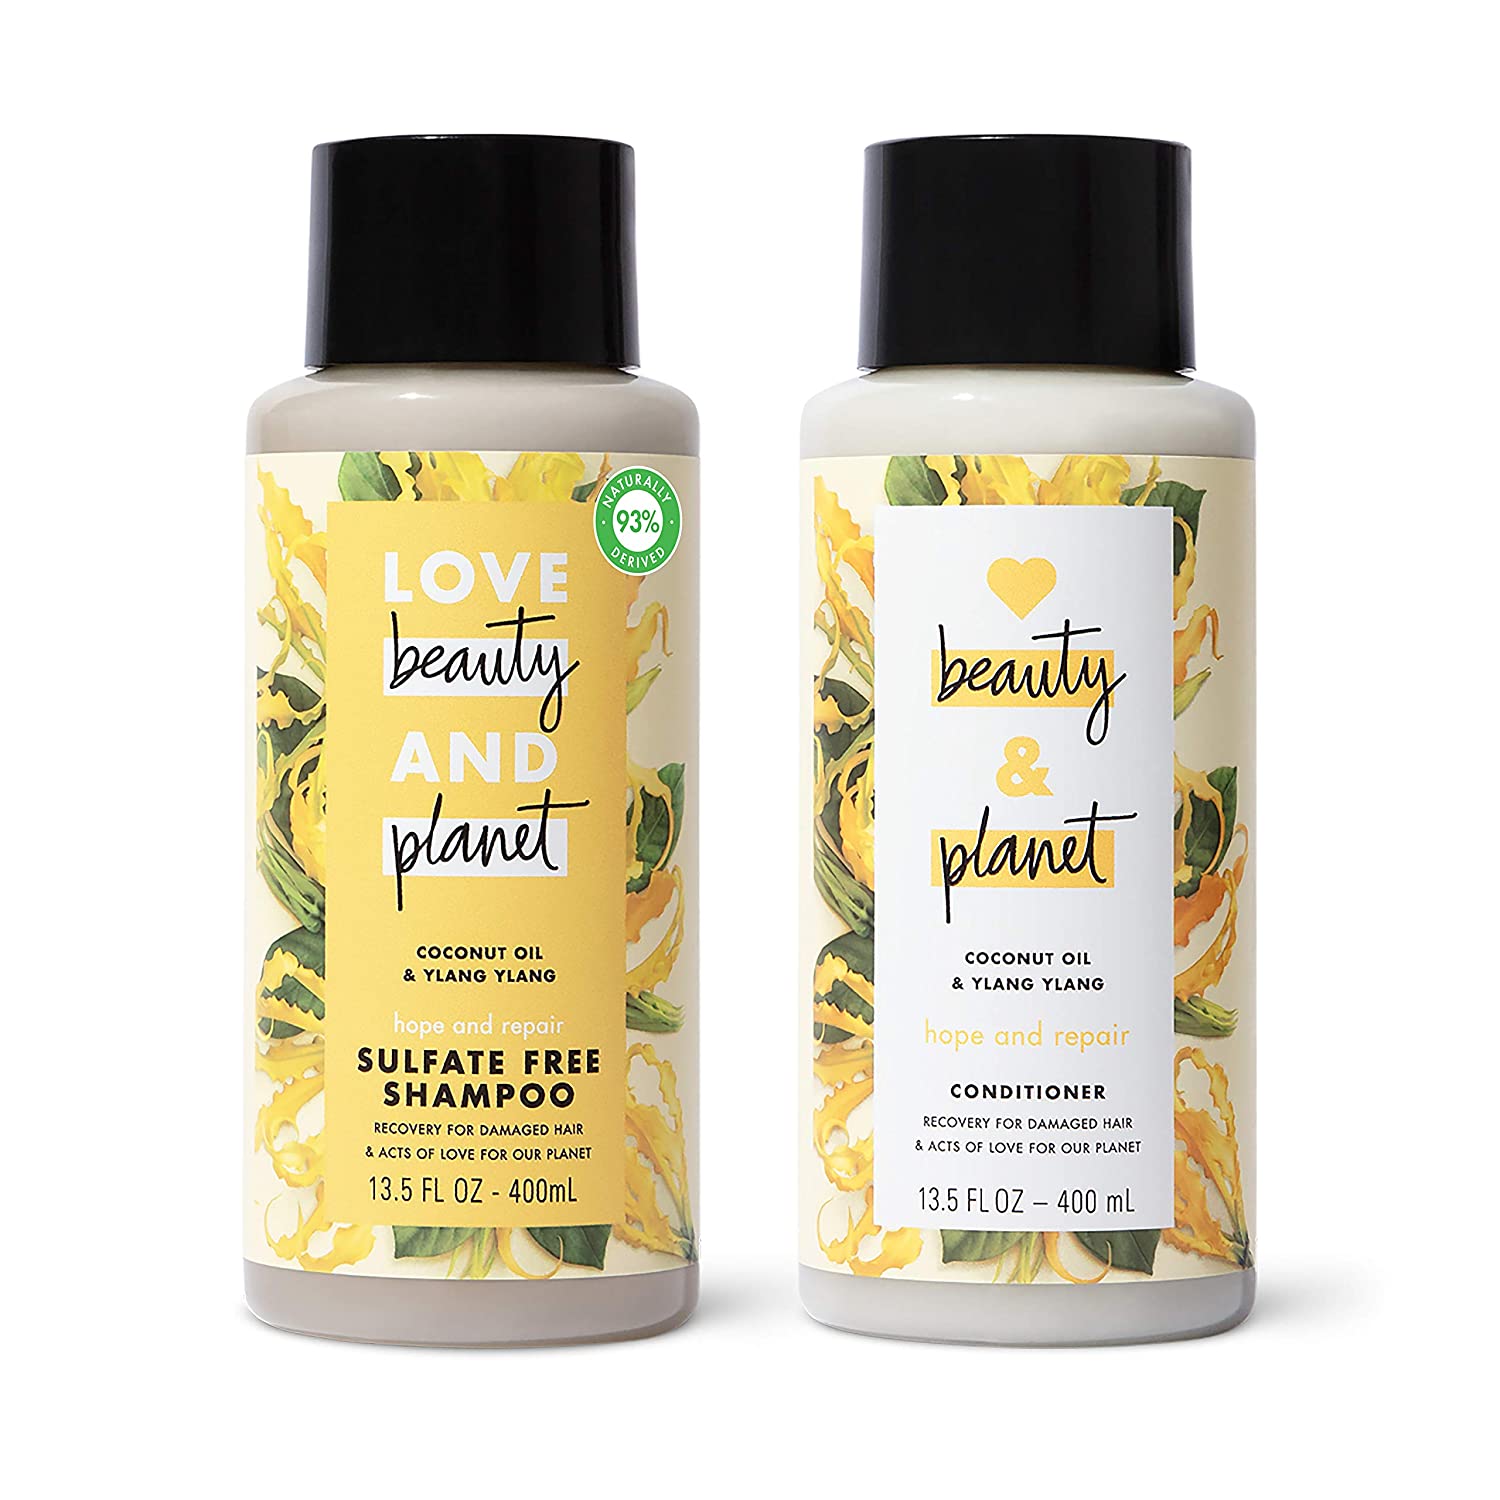 Love Beauty and Planet hope and repair Shampoo and conditioner 